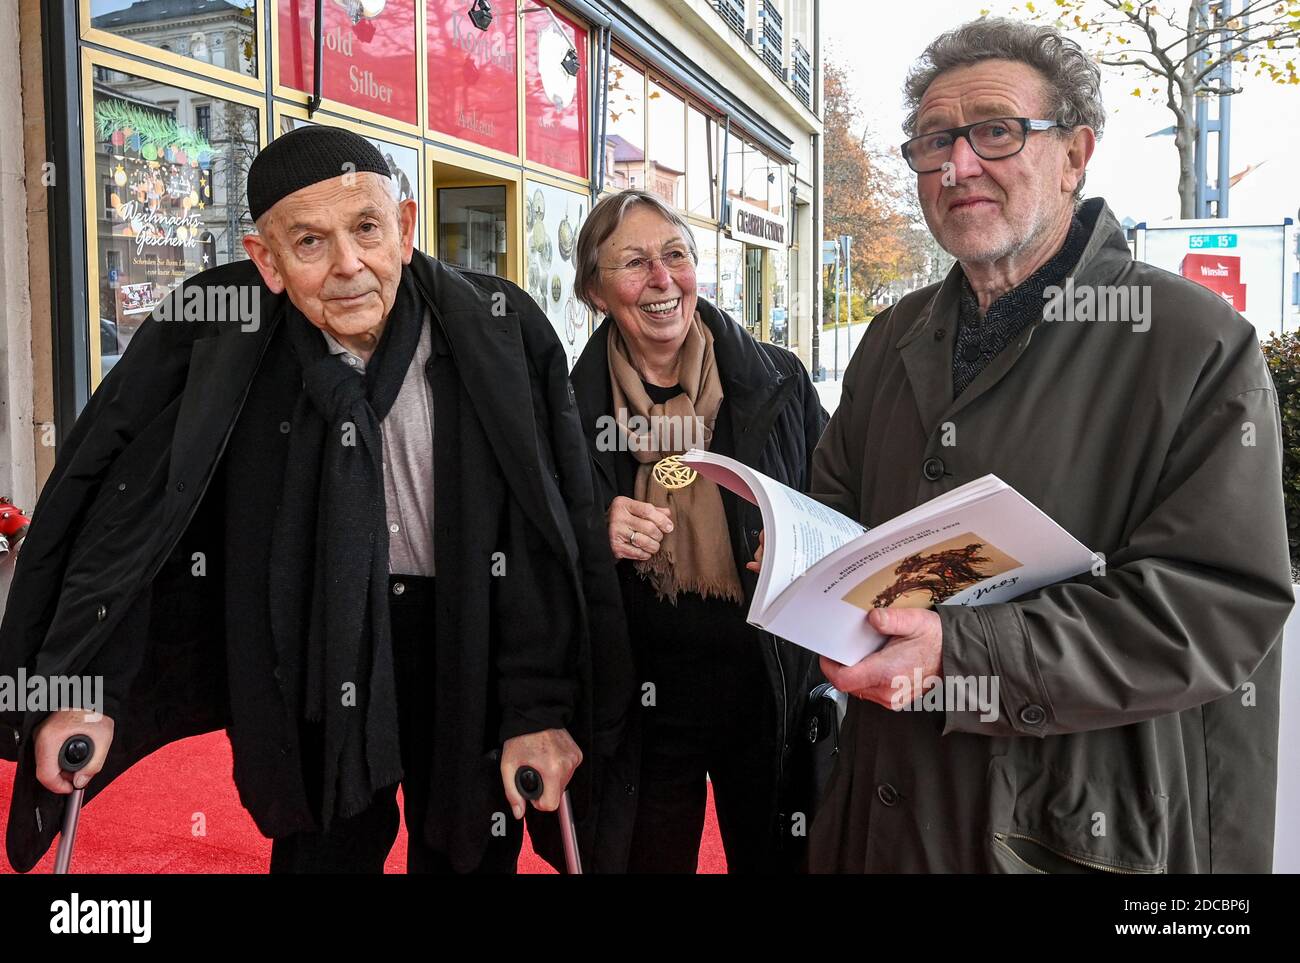 Chemnitz, Germany. 20th Nov, 2020. The Dresden painter and draughtsman Max Uhlig (l) stands next to his wife Angela Simon and the painter, graphic artist and sculptor Michael Morgner. The 'Foundation in honour of Karl Schmidt-Rottluff' has honoured Max Uhlig with its art award. In Uhlig's work, painting and drawing are combined 'to form an oeuvre of the highest quality', the jury, of which Michael Morgner is also a member, explained their choice. Credit: Hendrik Schmidt/dpa-Zentralbild/dpa/Alamy Live News Stock Photo